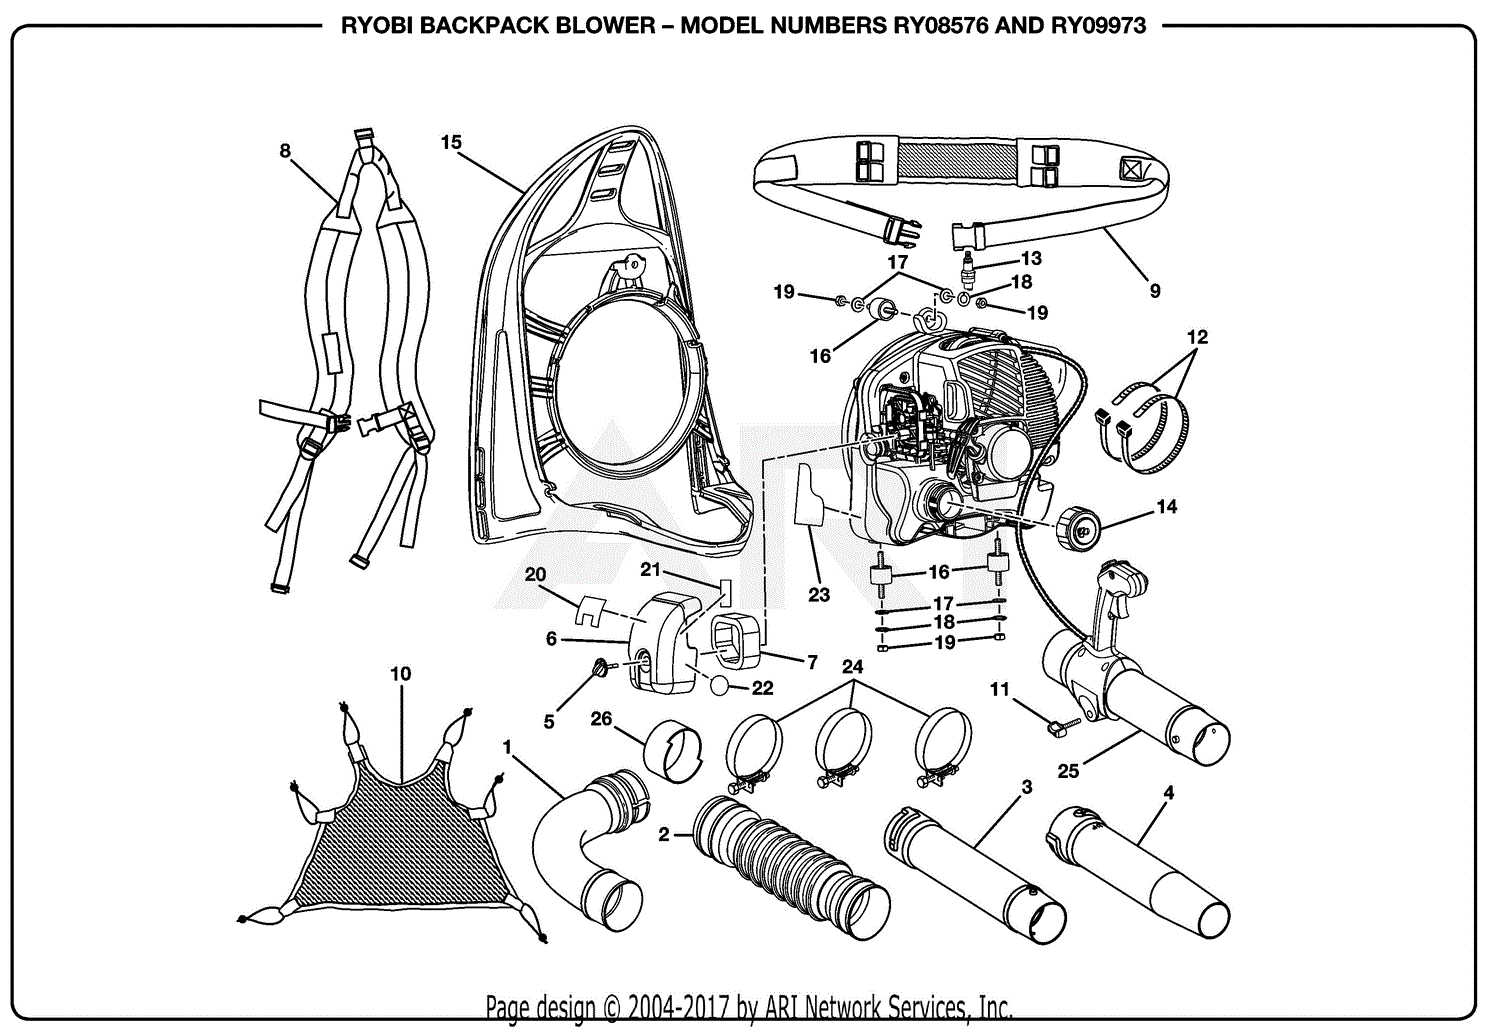 Homelite RY08576 Backpack Blower Parts Diagram for General Assembly